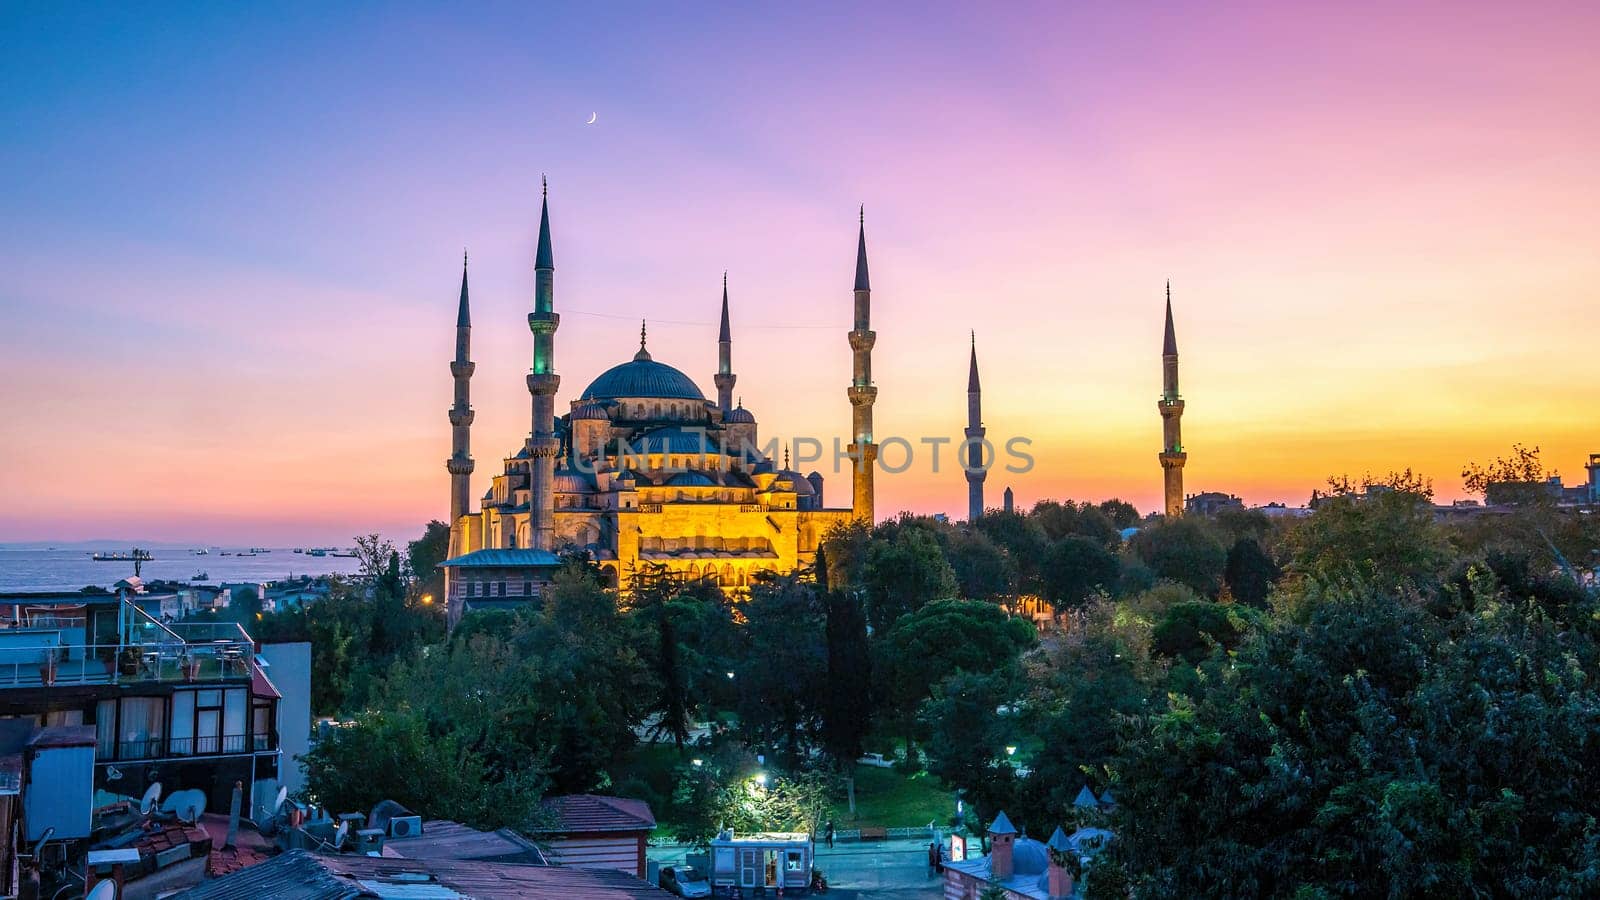 The Sultanahmet Mosque (Blue Mosque) in Istanbul, Turkey at sunset